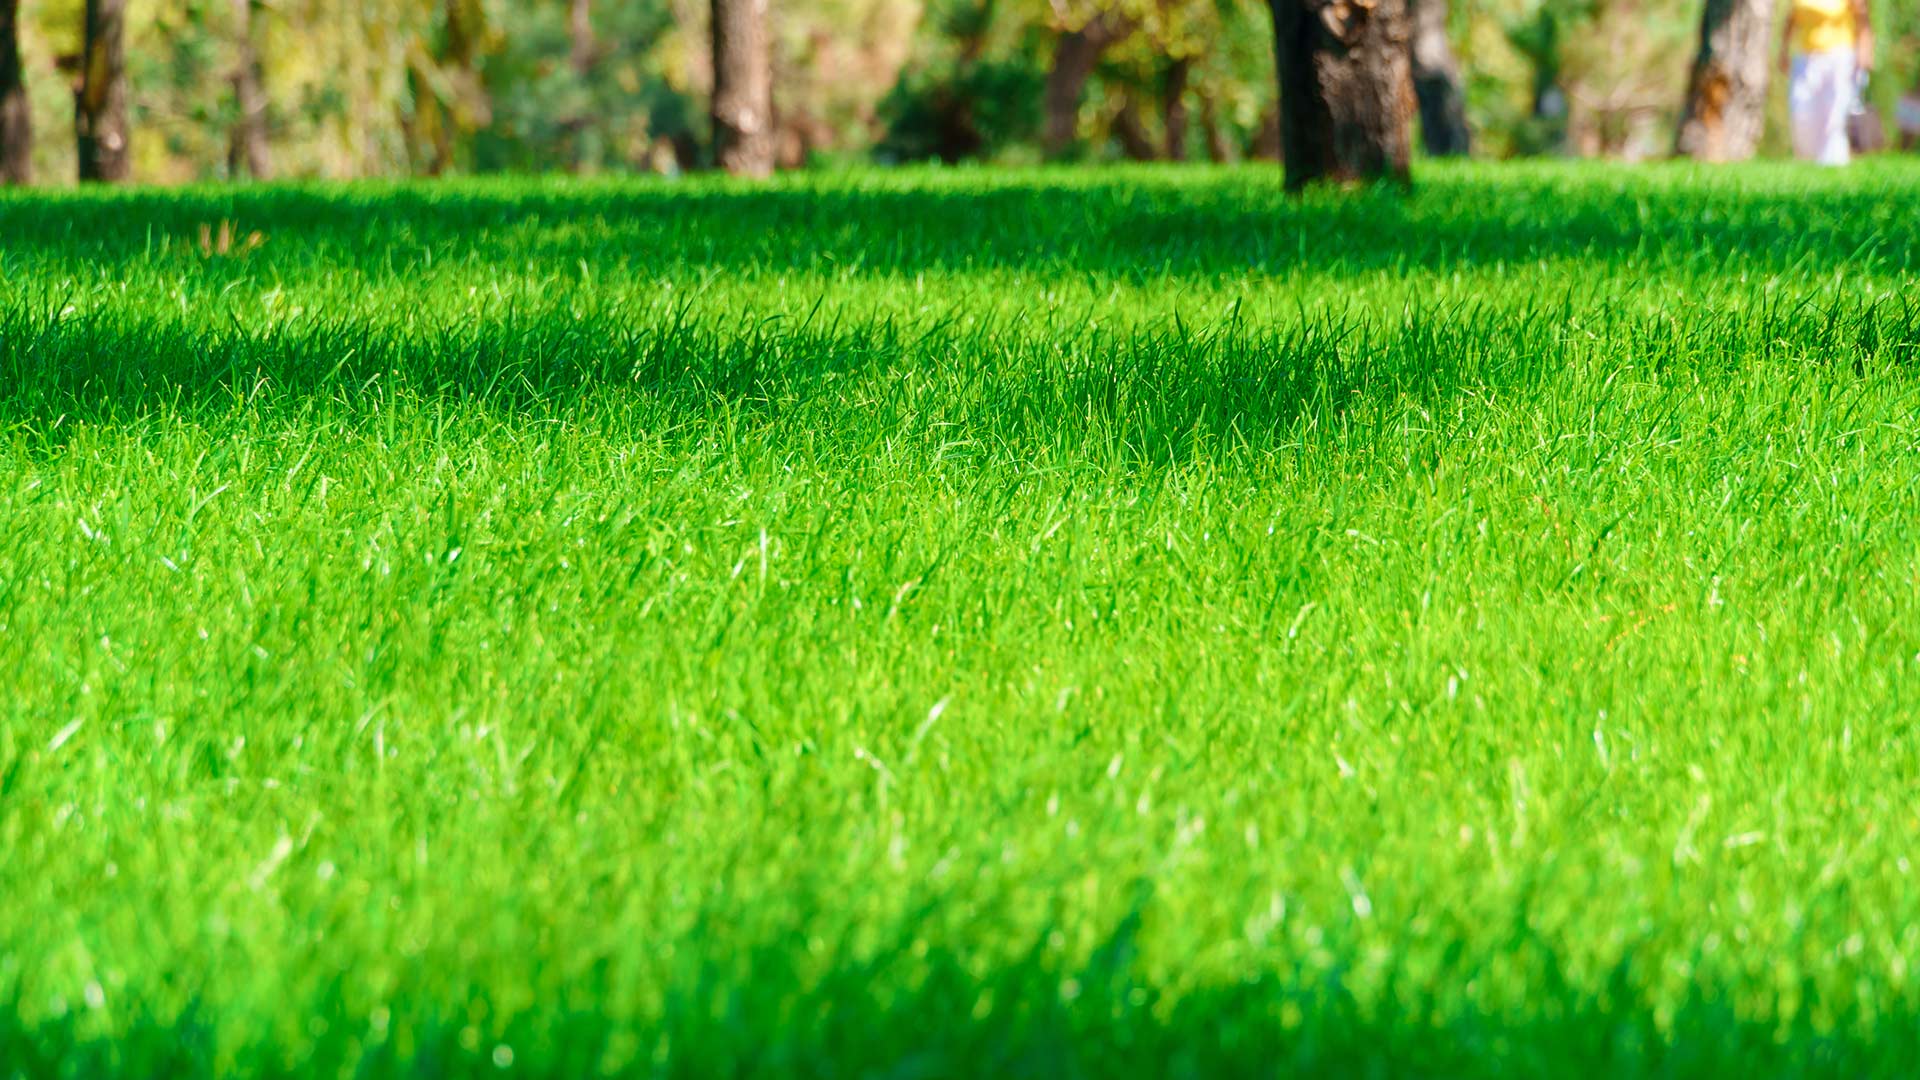 Fertilization & Weed Control - Always Combine These Two Lawn Care Services